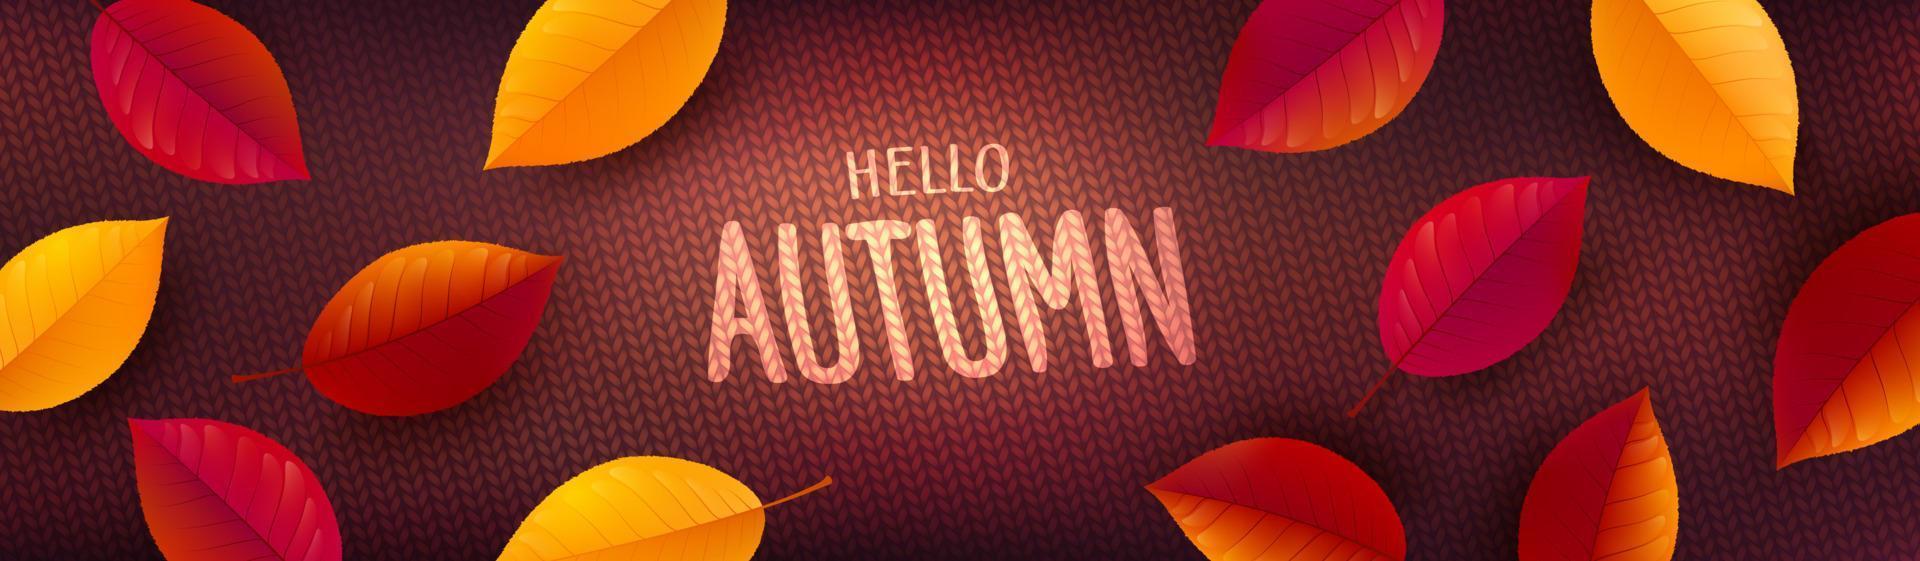 Autumn Poster or banner template with colorful Autumn leaves on knitted sweater background.Greetings and presents for Autumn and fall season concept. vector